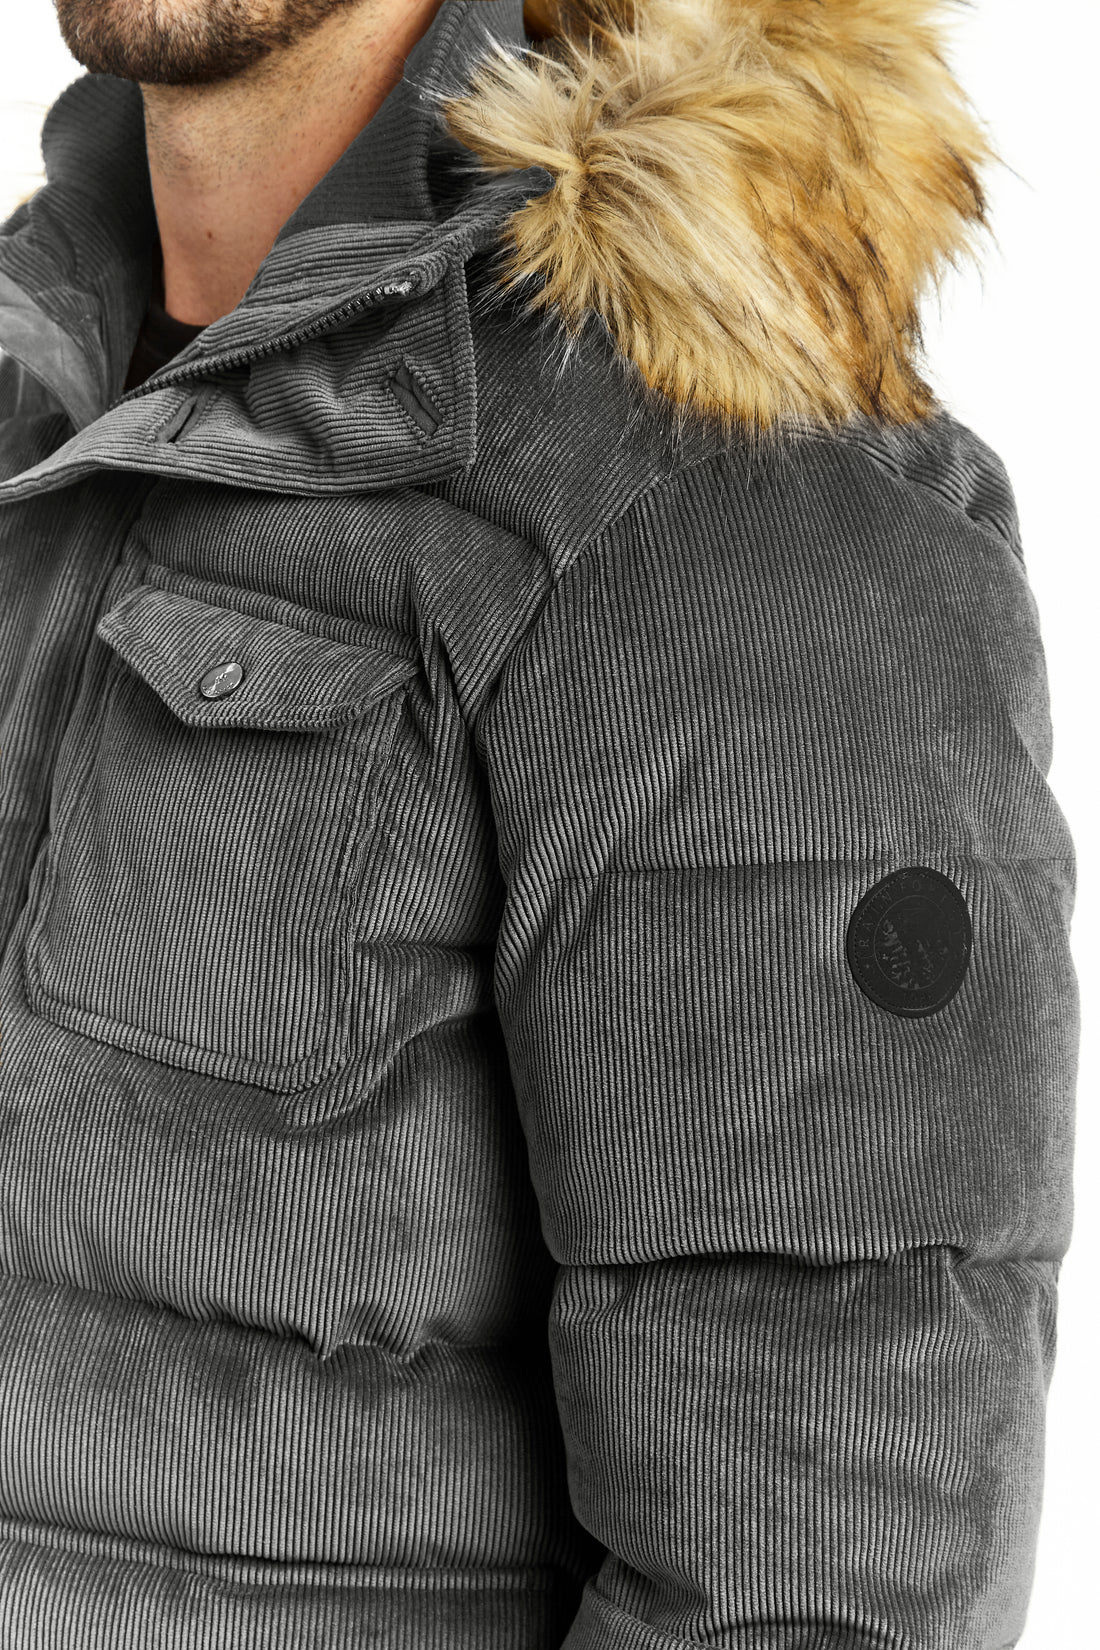 CORDUROY PARKA ATTACHED HOOD